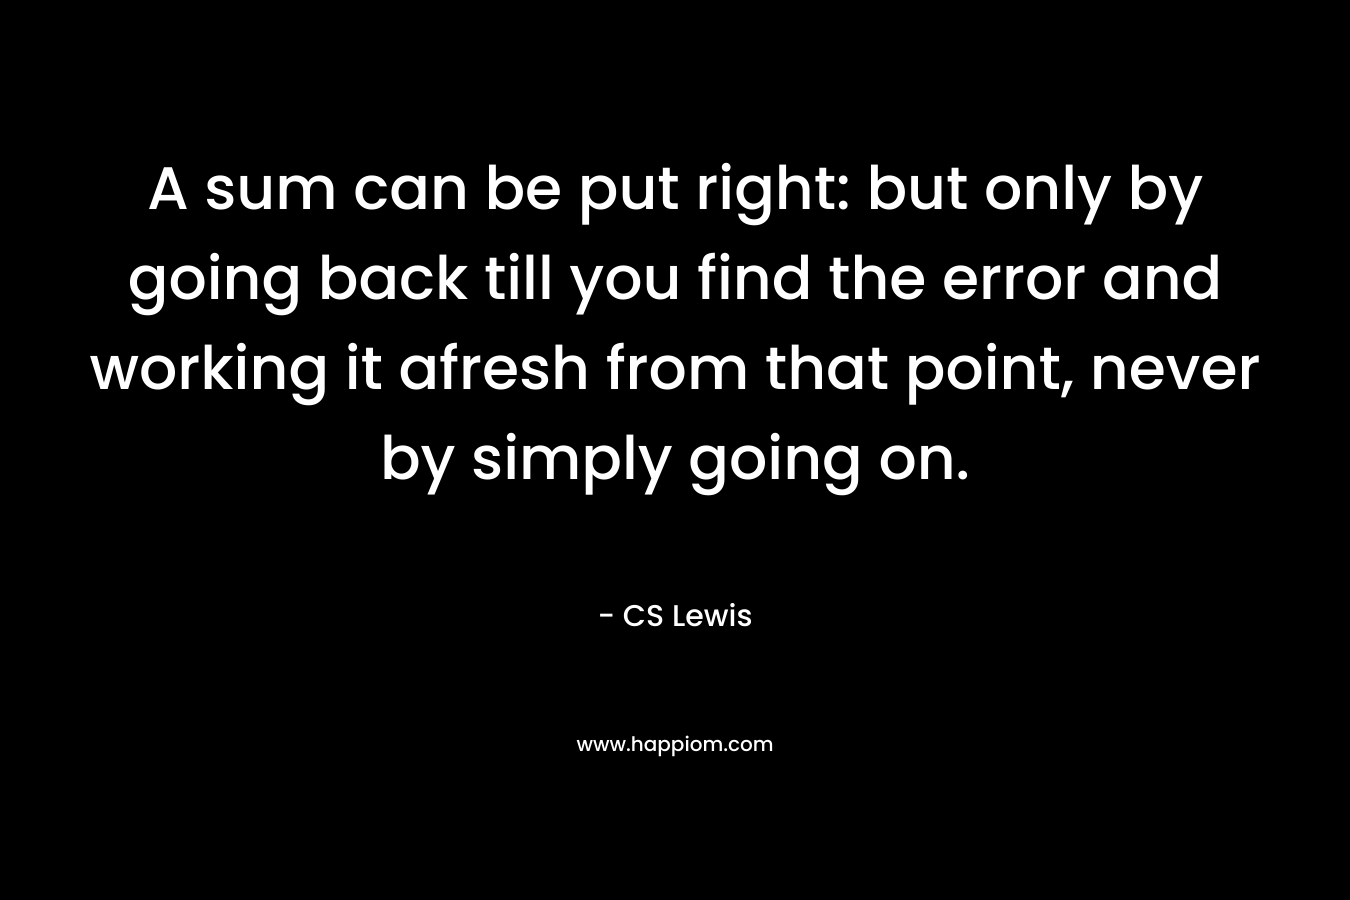 A sum can be put right: but only by going back till you find the error and working it afresh from that point, never by simply going on. – CS Lewis